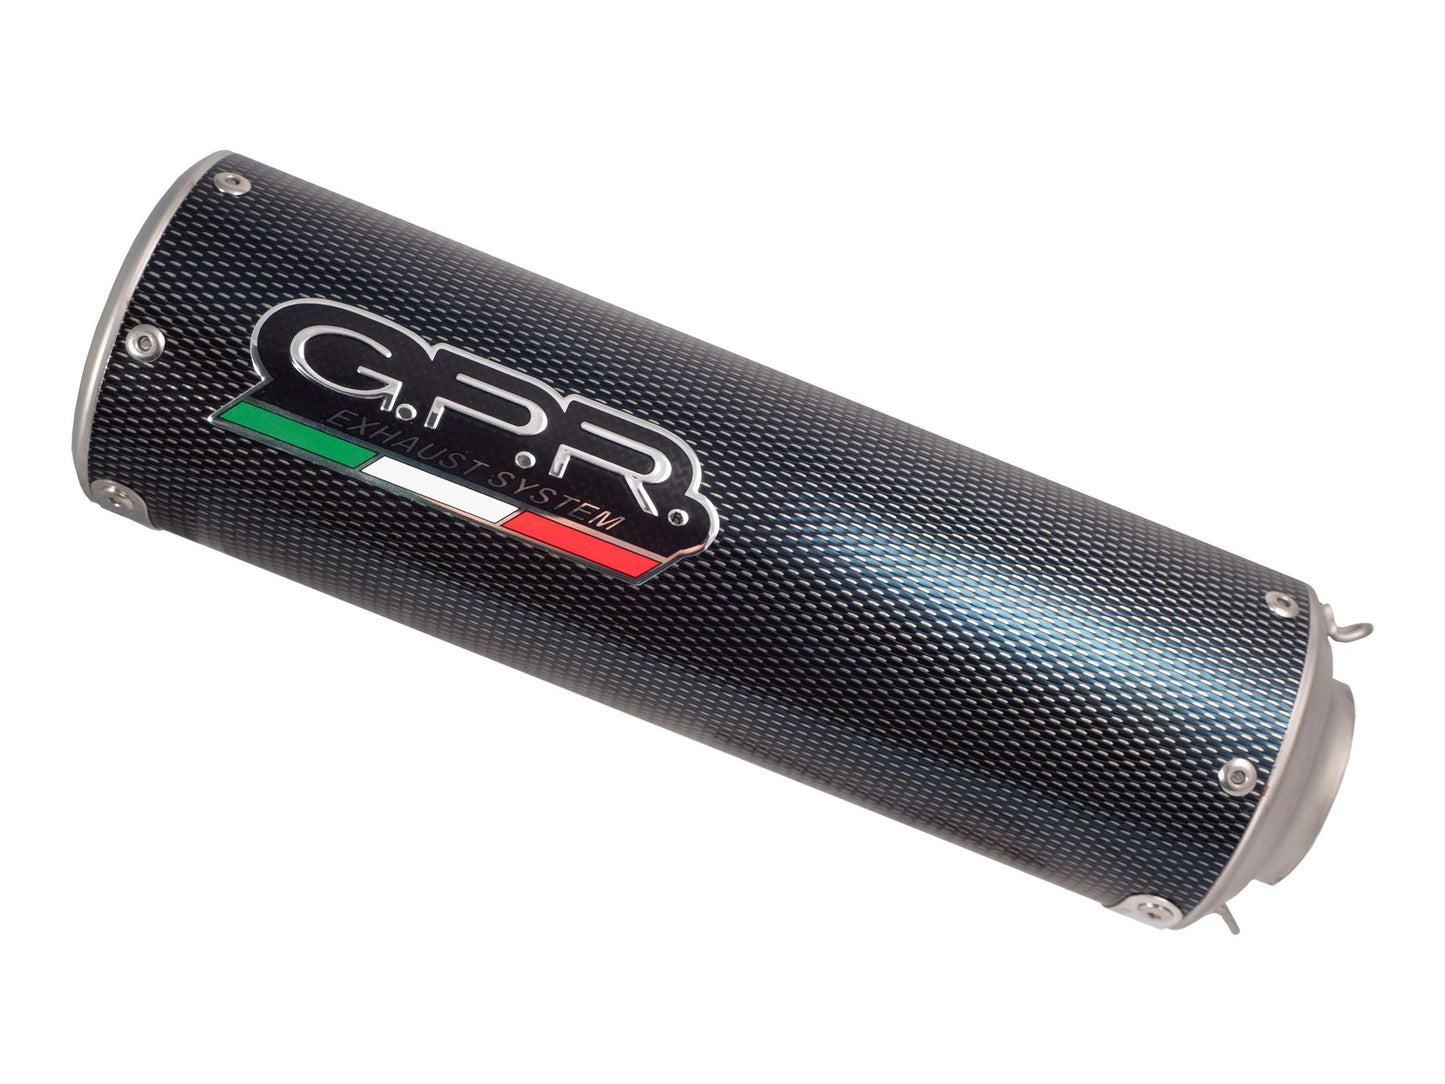 GPR Exhaust for Benelli 502 C 2019-2020, M3 Poppy , Slip-on Exhaust Including Removable DB Killer and Link Pipe